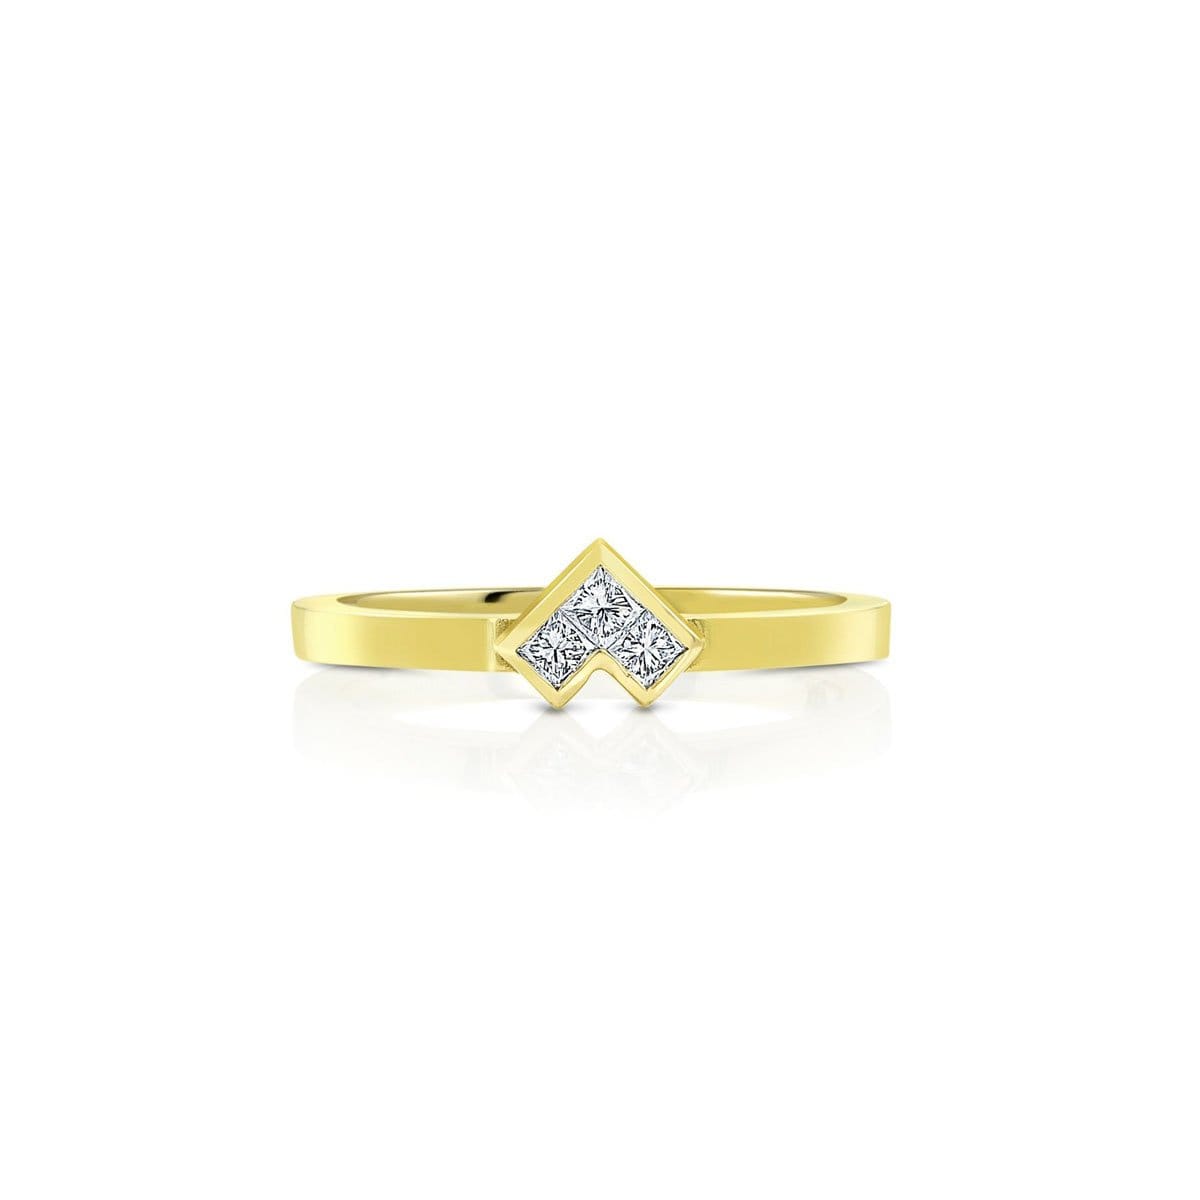 Power of 3 Yellow Gold Ring